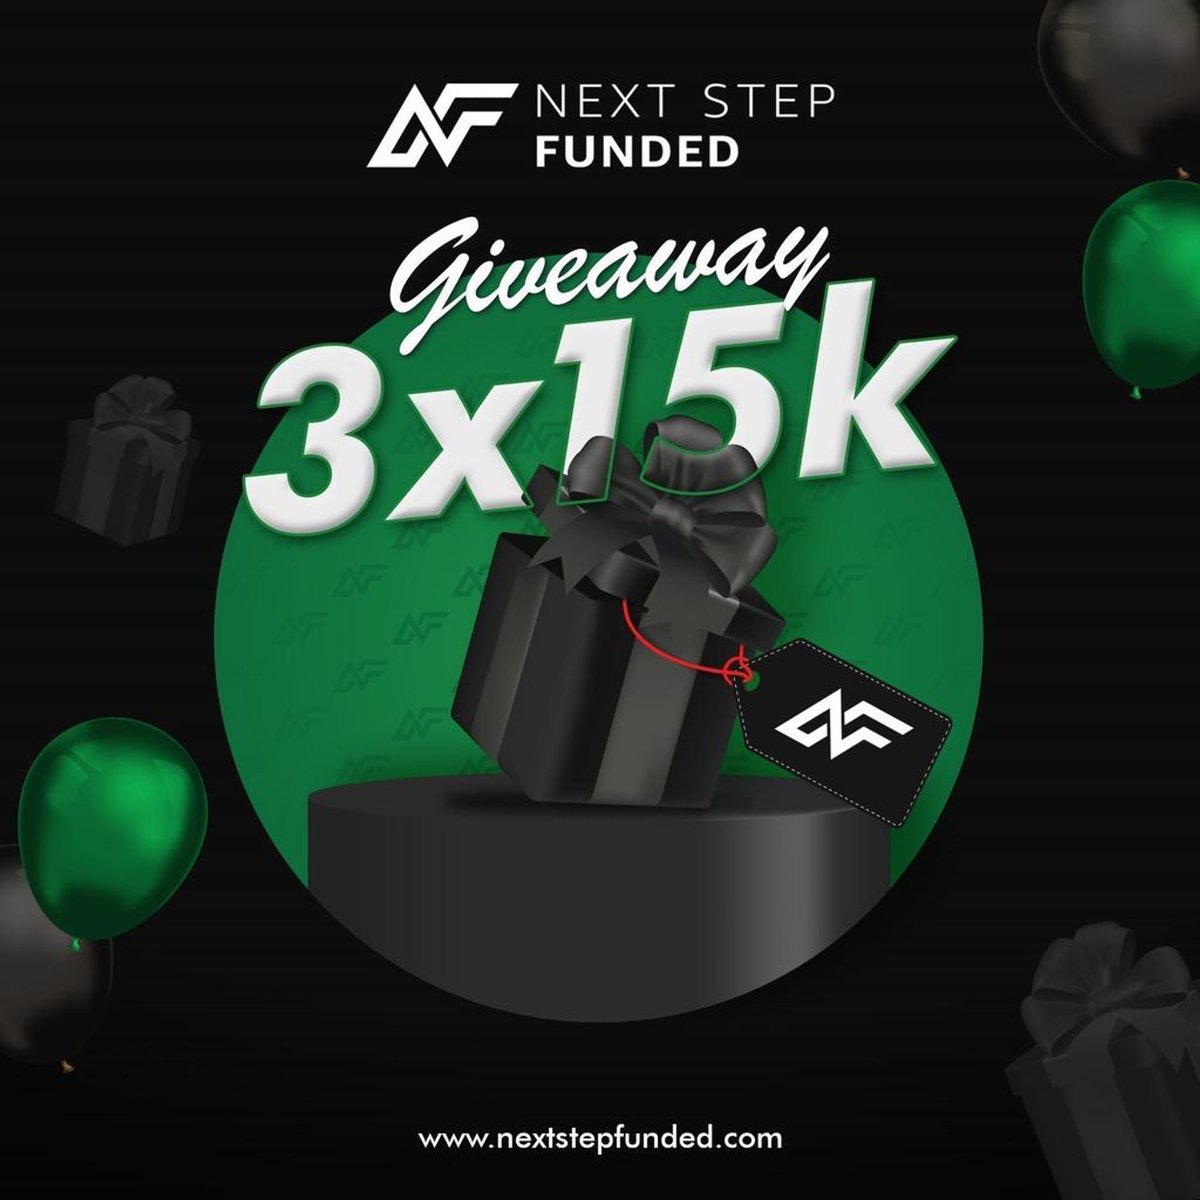 💚 3 x $15k Giveaway 💚

1⃣ Follow @NextStepFunded
2⃣ Like & Repost
3⃣ Tag 3 traders who should get account with us 🔥

*ends in 4 days